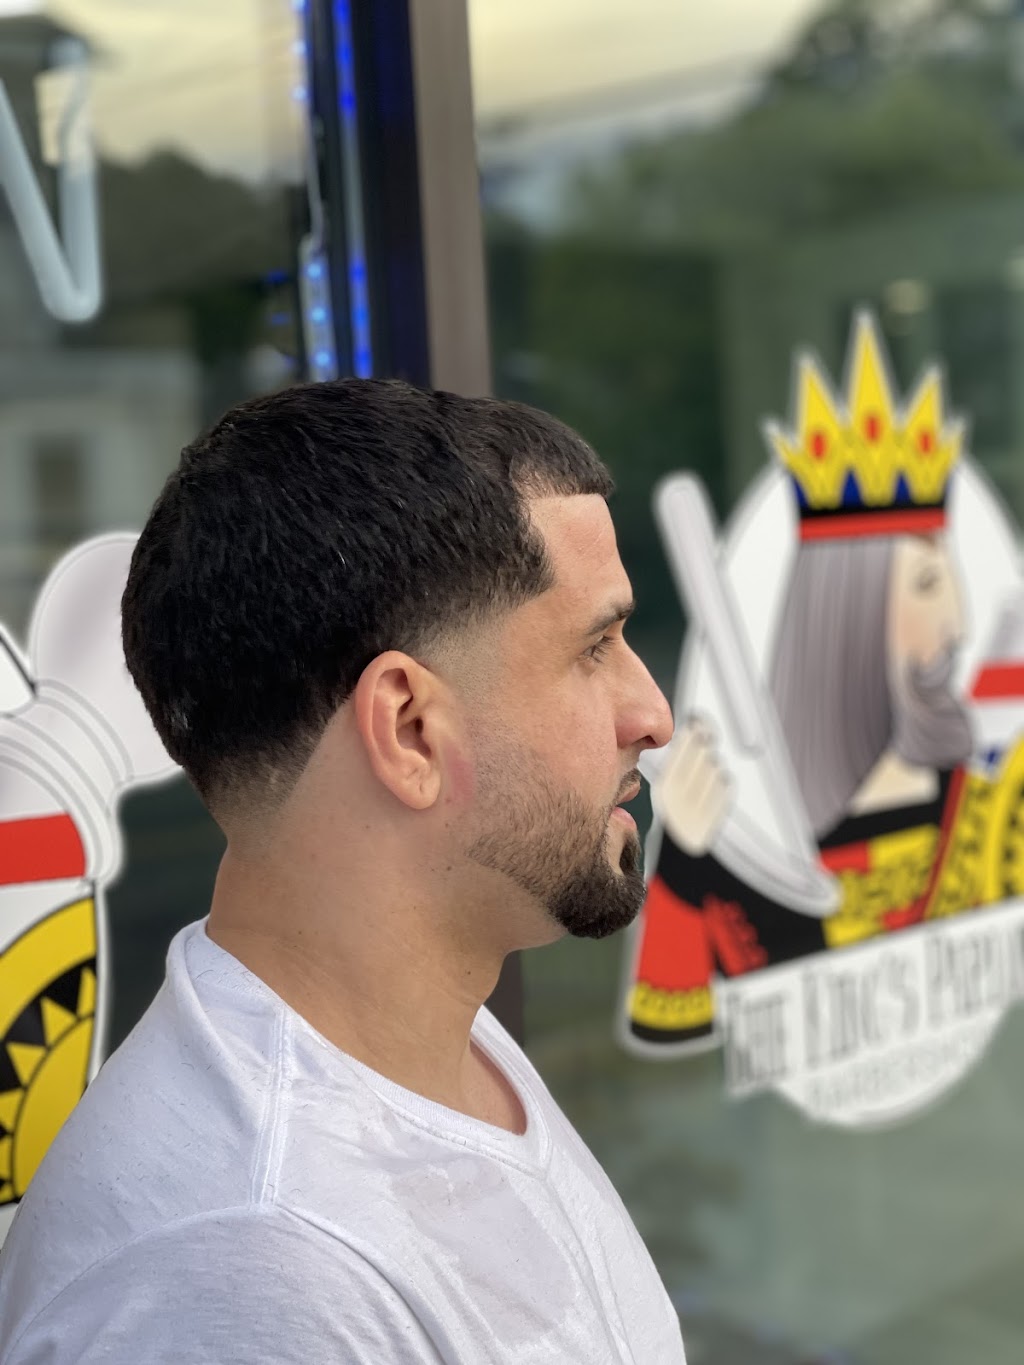 The Kings Parlor Barbershop | 1142 Broadway, Fountain Hill, PA 18015 | Phone: (610) 419-0186